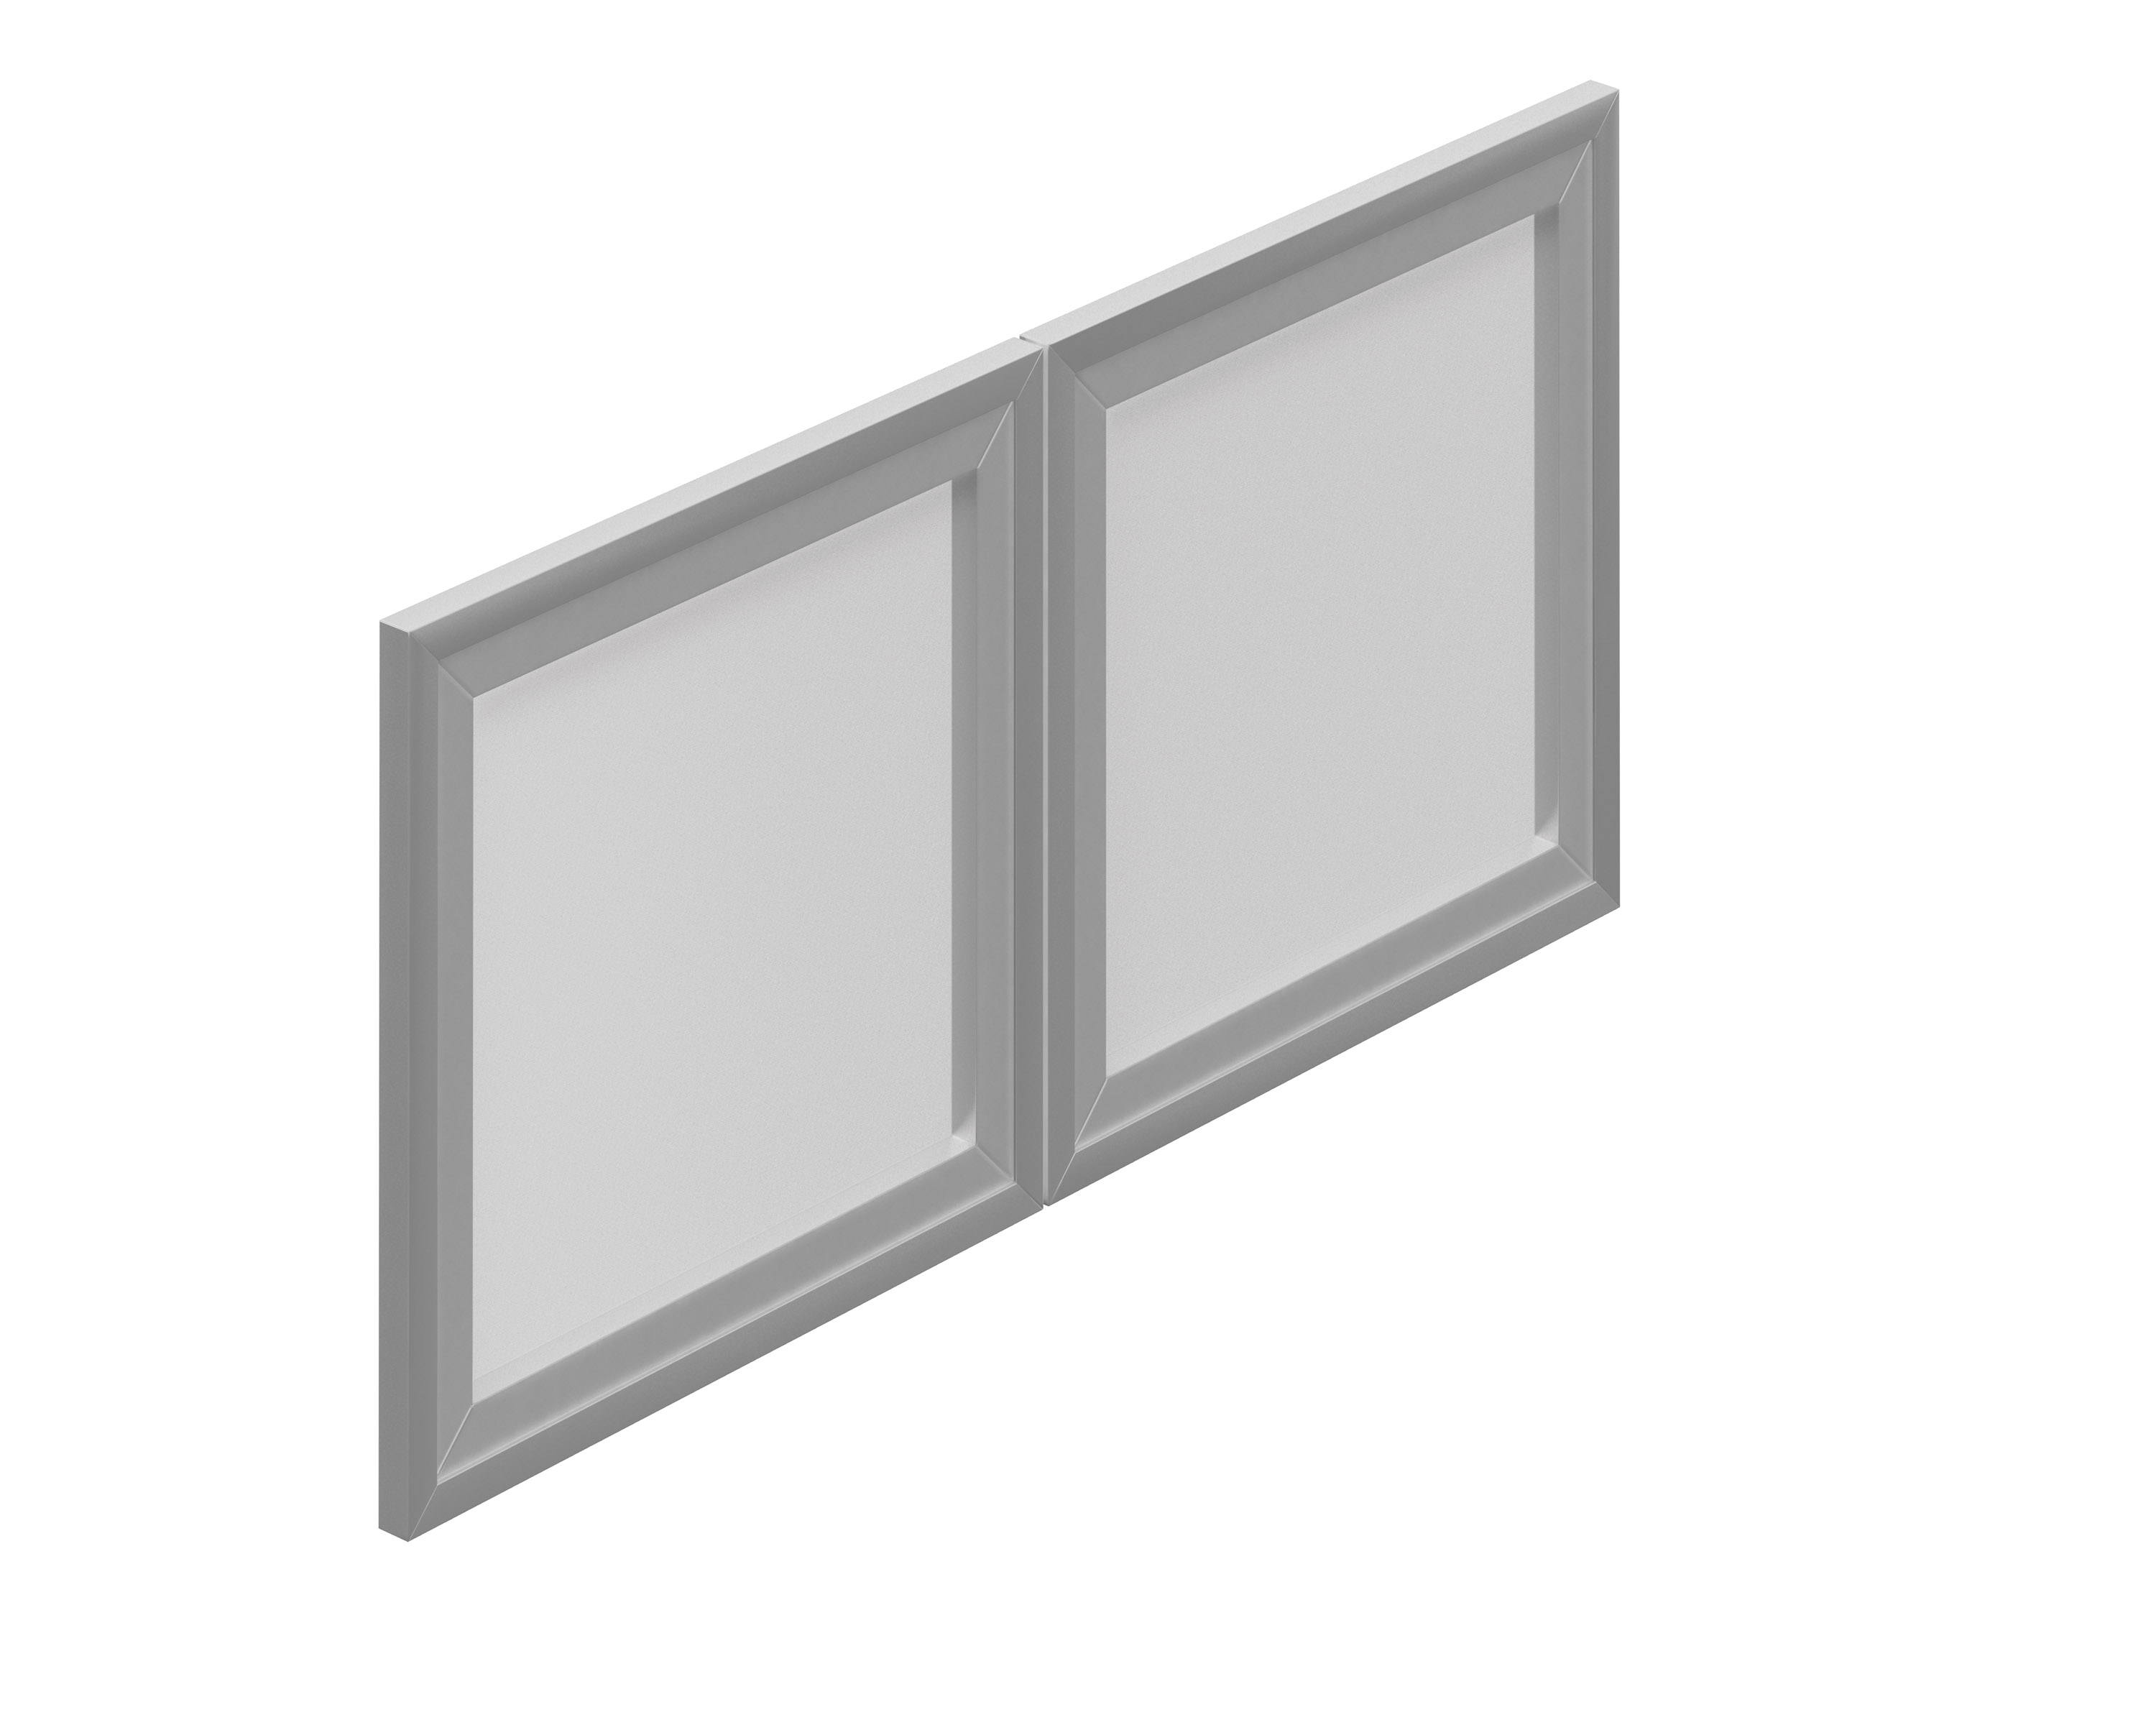 Offices To Go Superior Laminate SL36SIDR Silver Doors for SL36HO and SL36WC